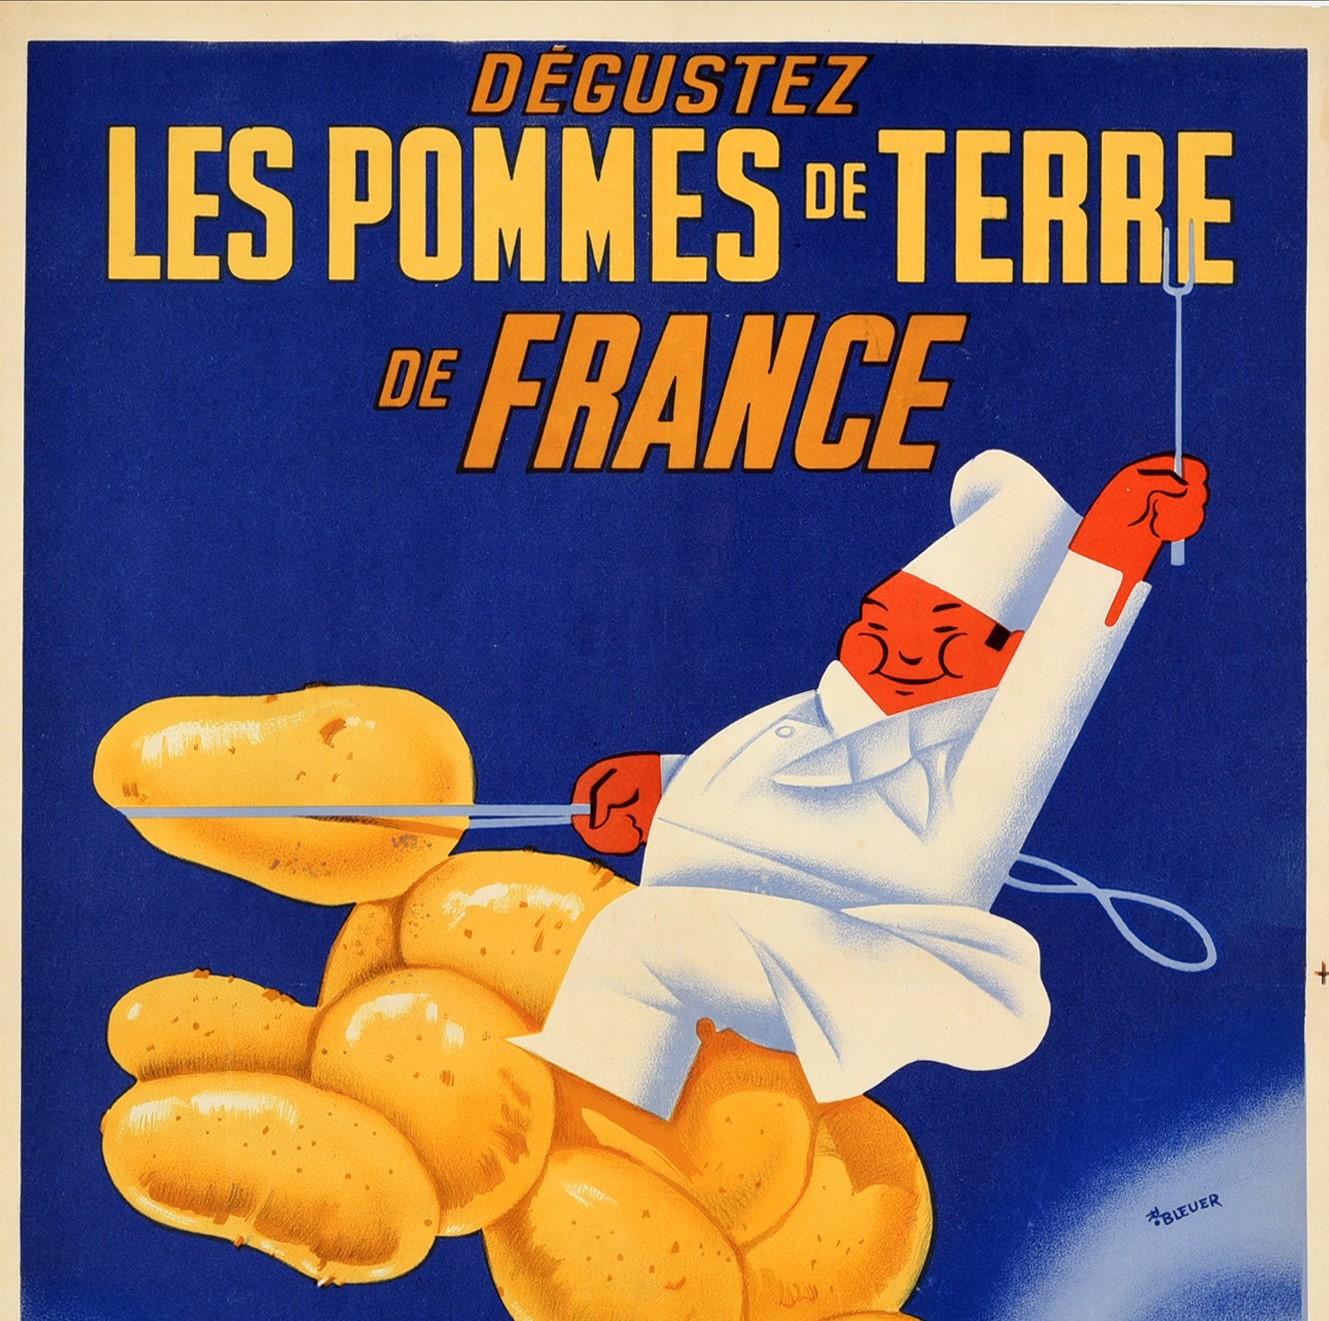 Original Vintage Poster Enjoy Potatoes Of France Agriculture Food French Cuisine - Print by R. Bleuer